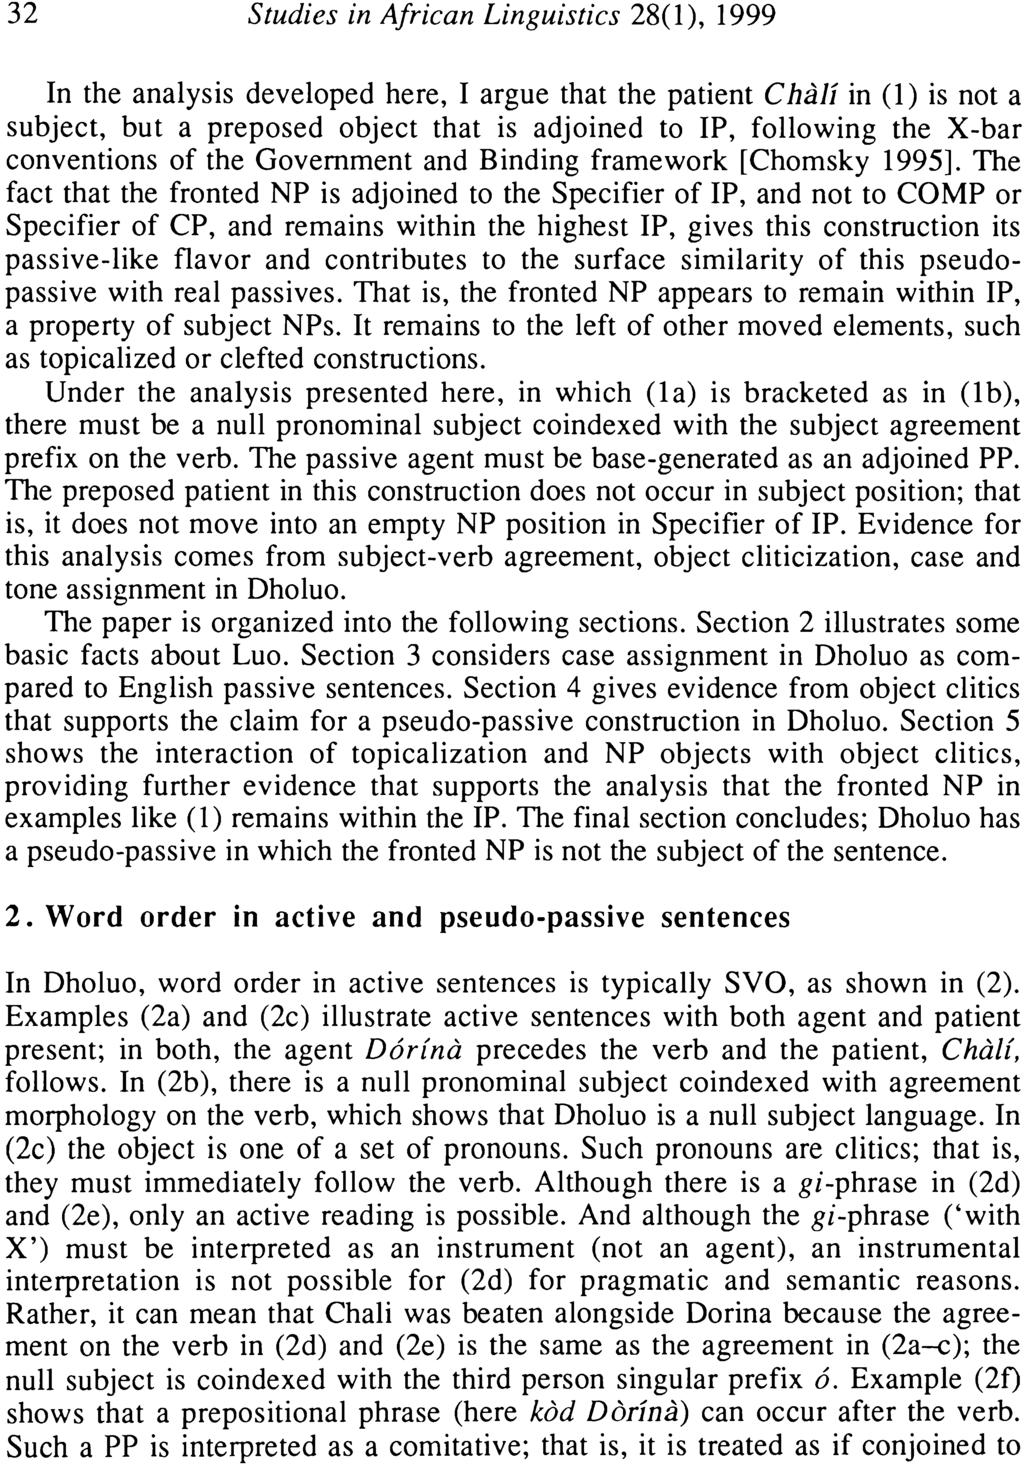 32 Studies in African Linguistics 28(1), 1999 In the analysis developed here, I argue that the patient CheHi in (1) is not a subject, but a preposed object that is adjoined to IP, following the X-bar